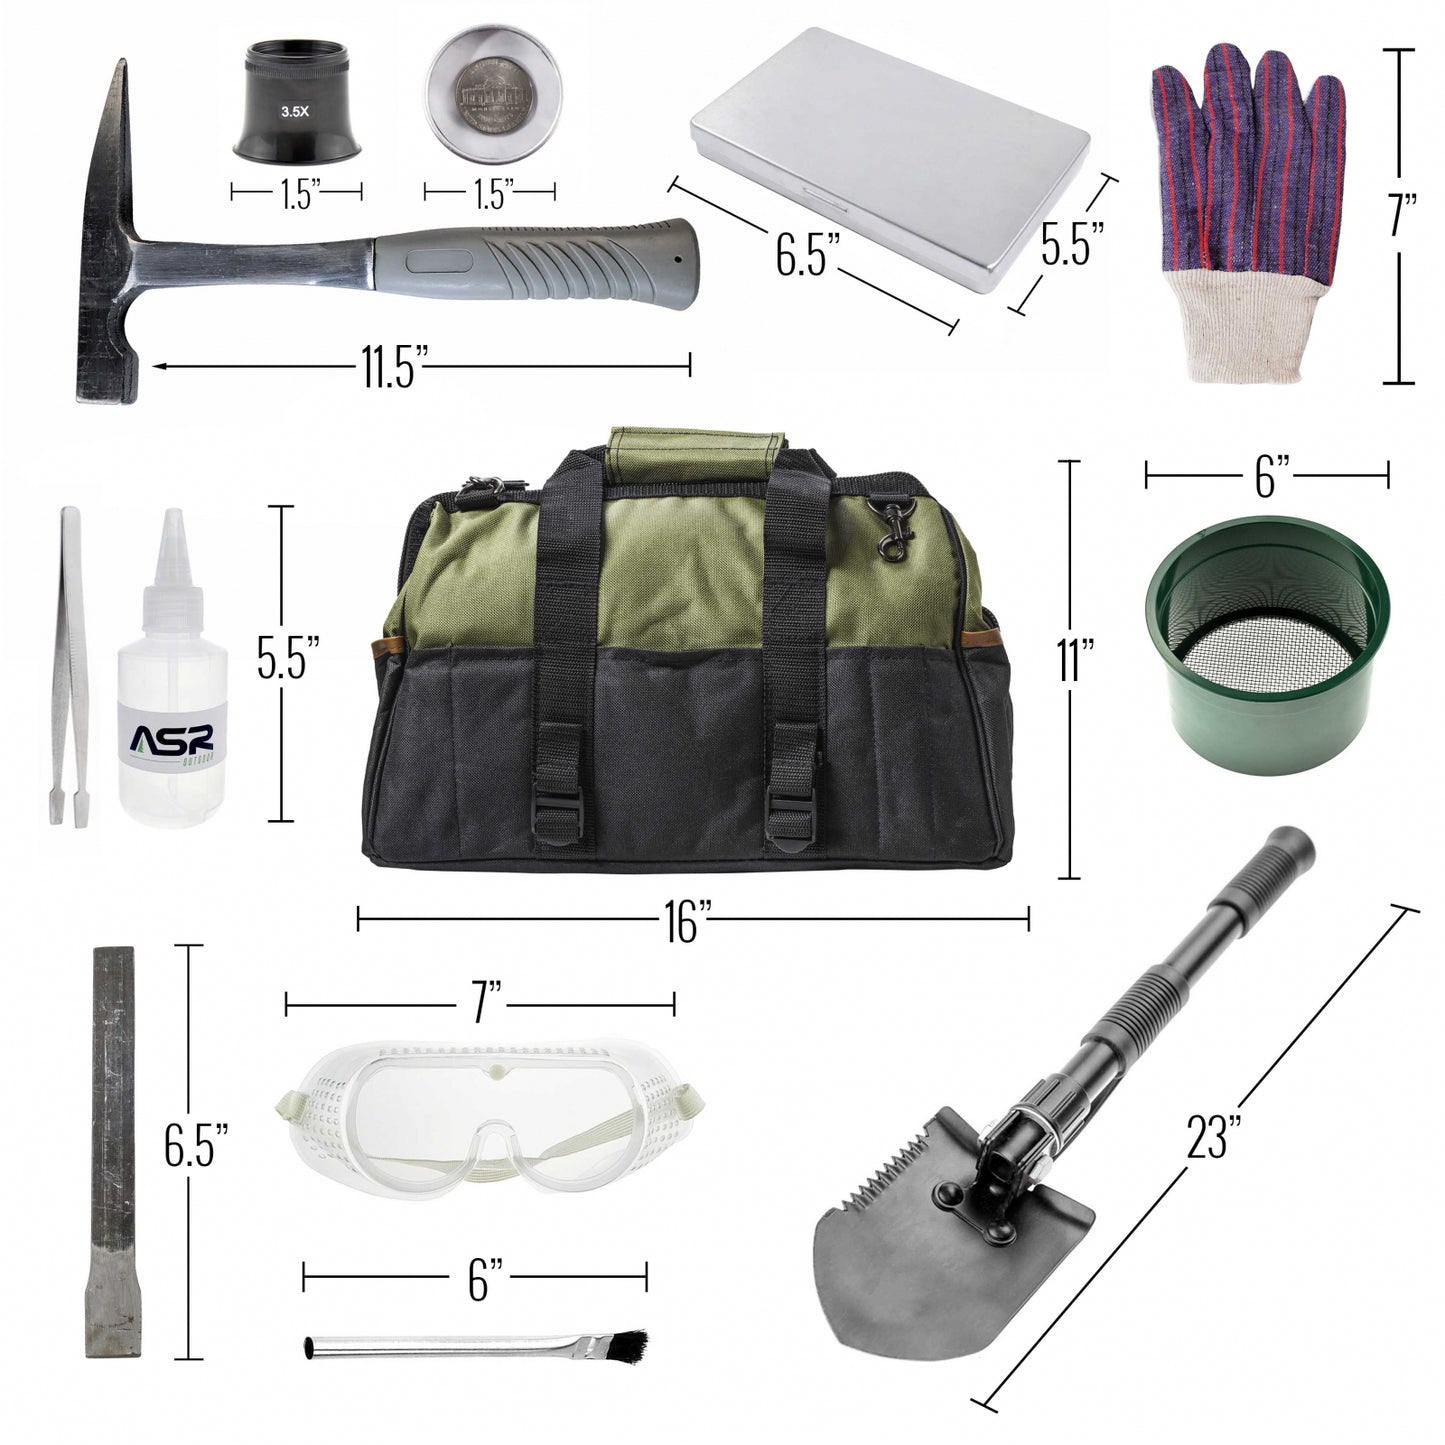 13pc Beginner Geology Rock Hounding Kit with Mining Tools and Carry Bag